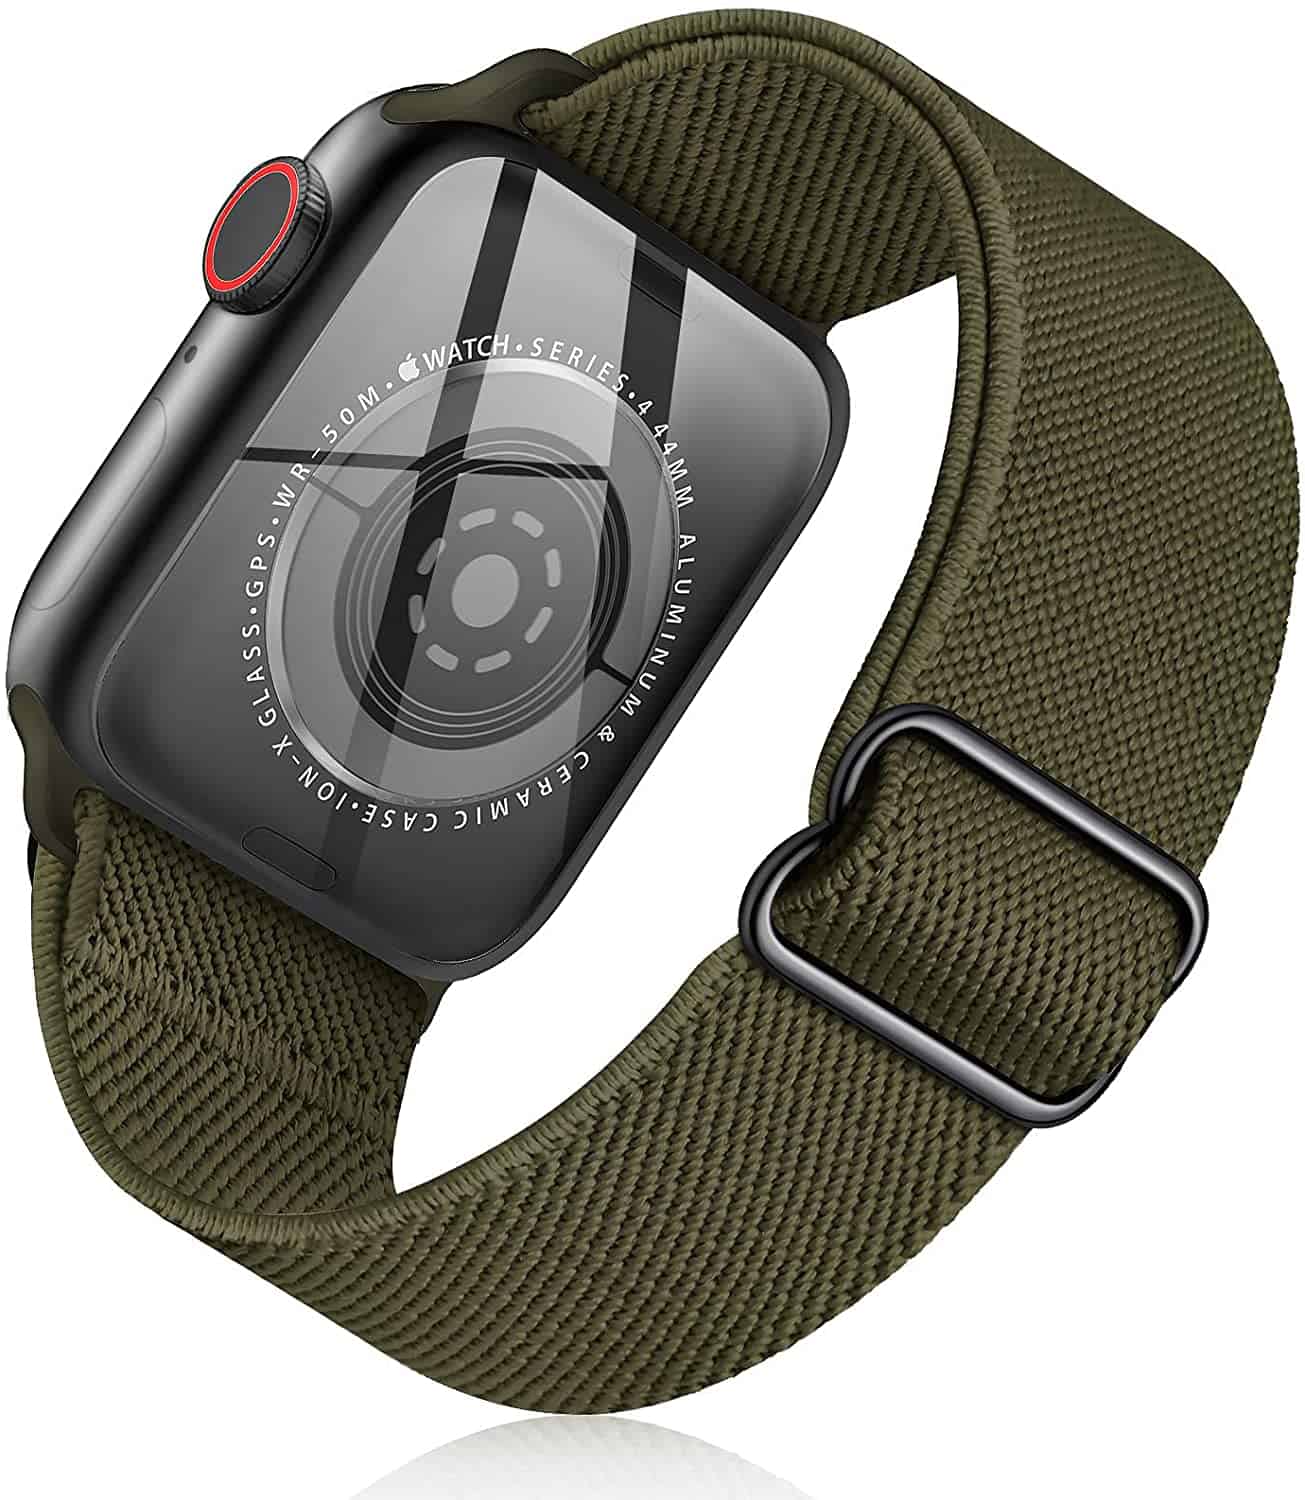 Apple Watch Band, Last-Minute Gift Ideas For Him